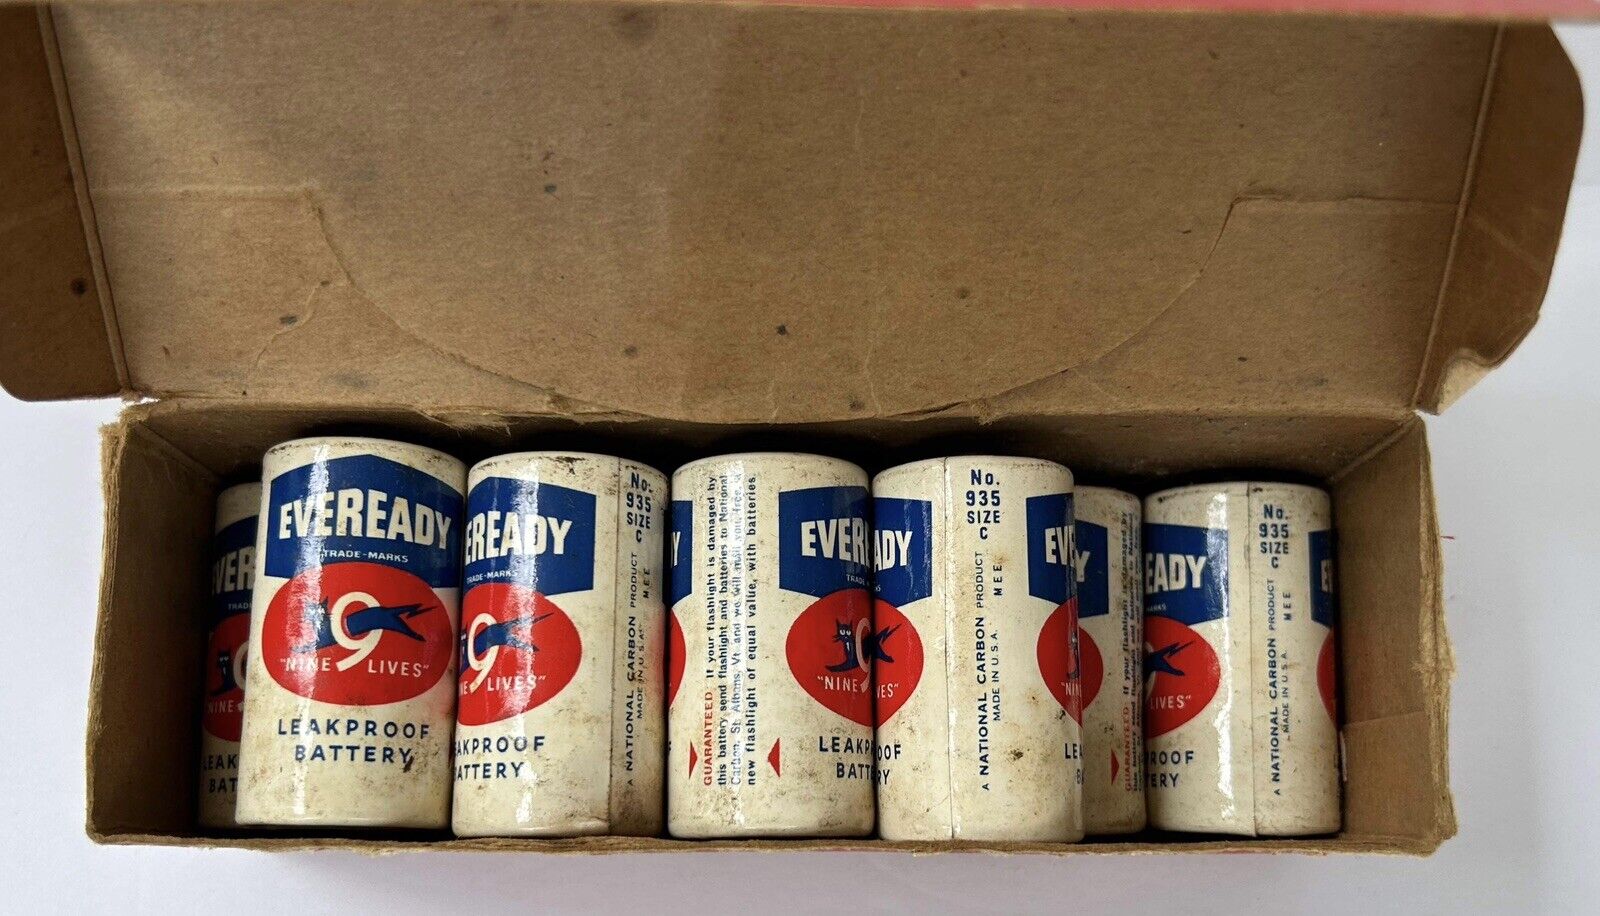 Vtg Eveready 1940s Battery No. 935 C Cell Lot Of 10 LEAKPROOF \